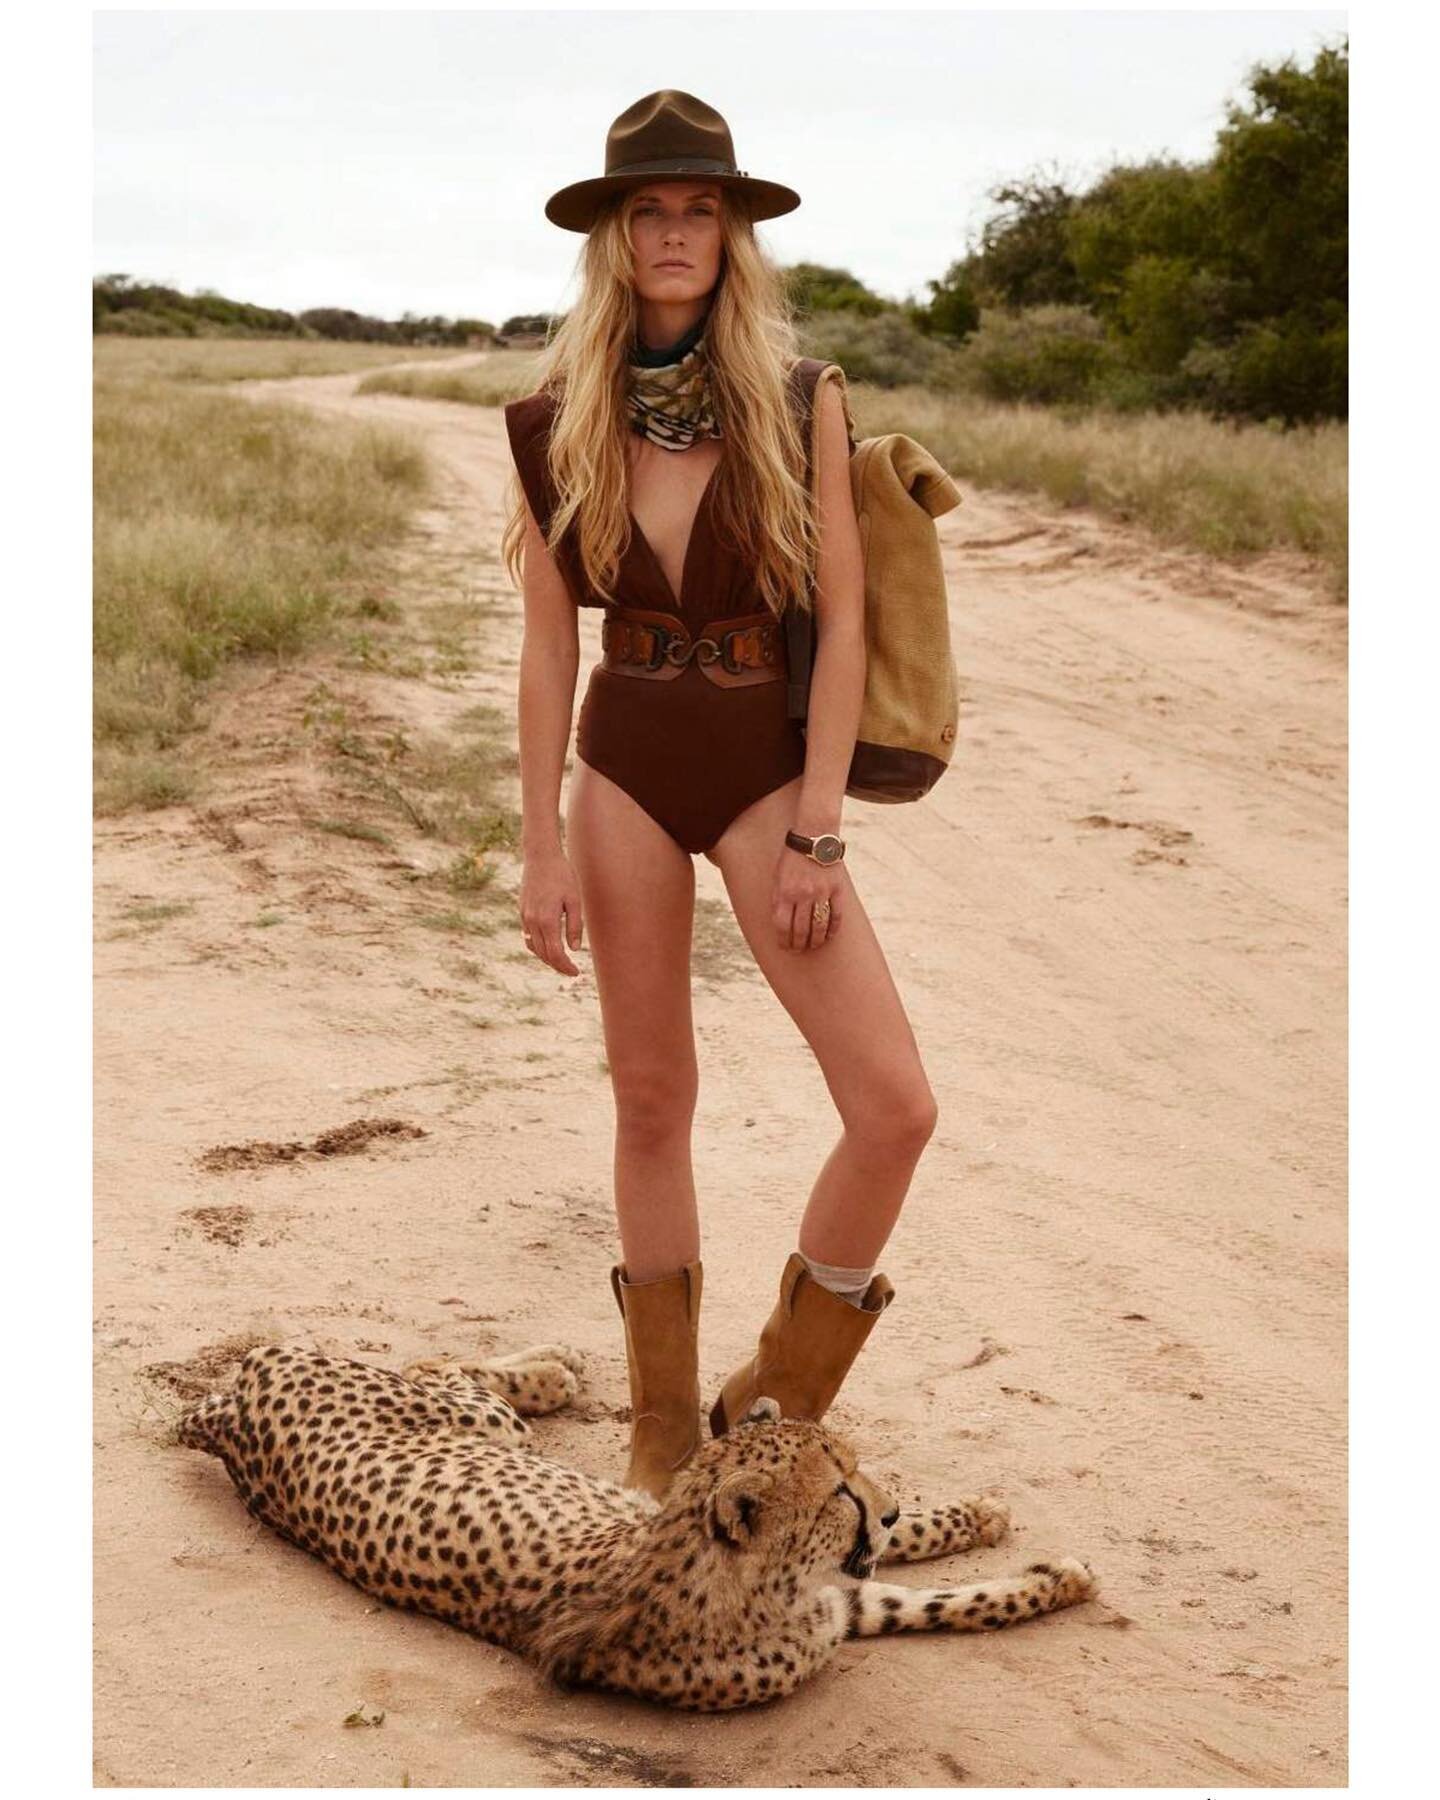 SAVANA BELLE 🐆 ELLE  France 
with gorgeous @alekswildchild 
styled by @hortensemanga  fashion editor @charlottedeffe#
clothes by @luzcollection @hm__conscious 
@bhallot_bags 
@baserange 
boots by @antirouille_vintage 
watch by @chopard 
ring by @kll